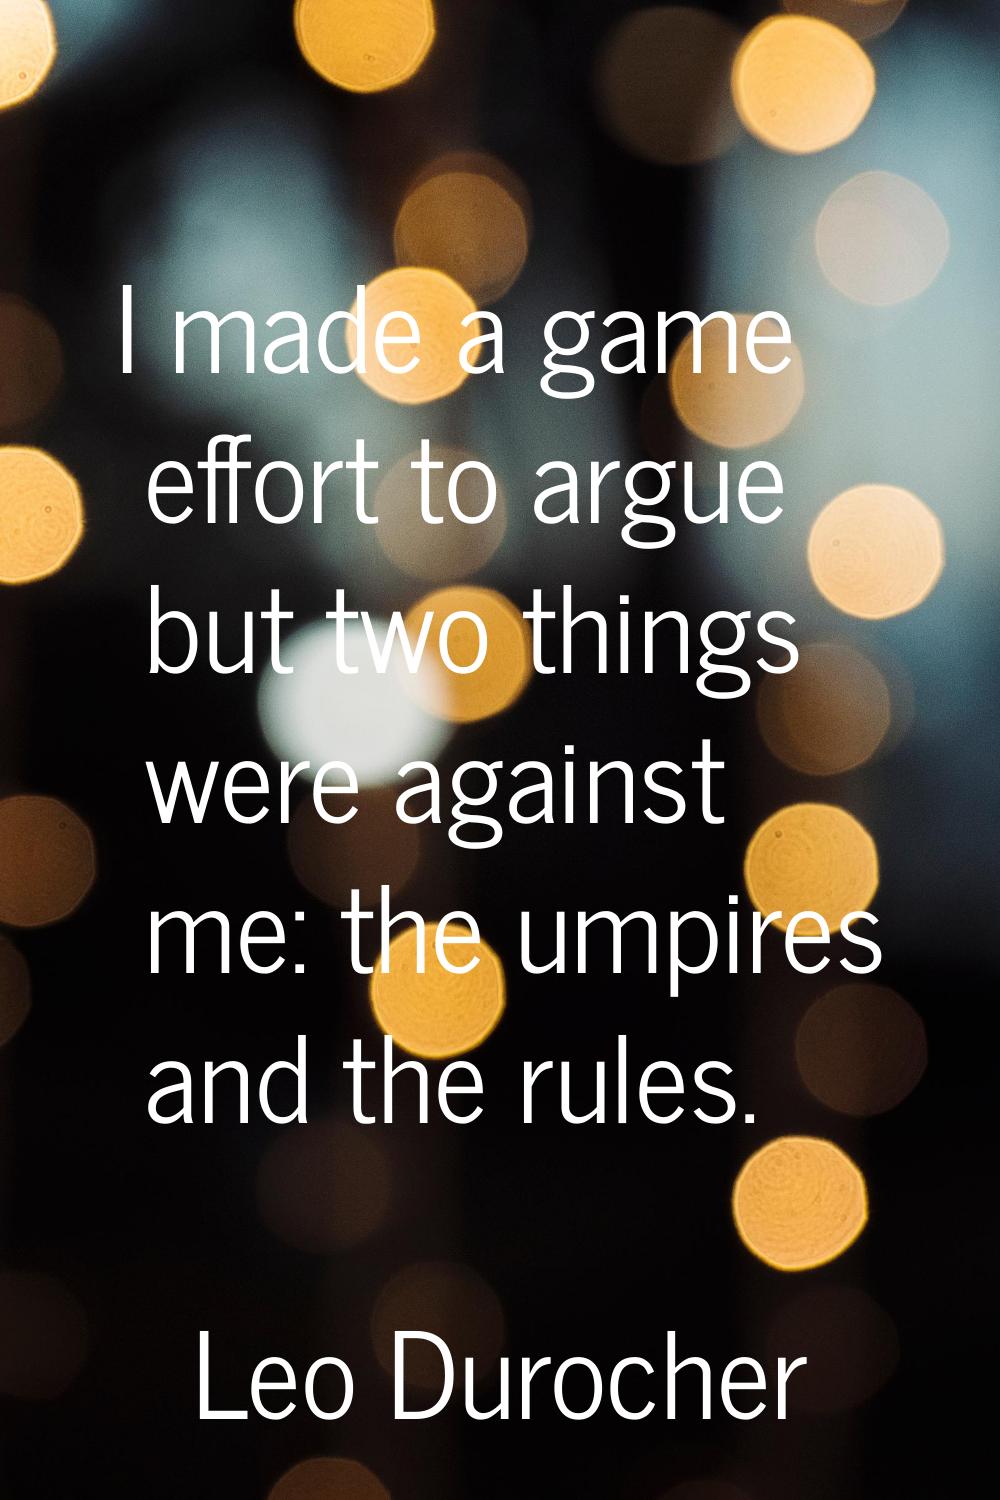 I made a game effort to argue but two things were against me: the umpires and the rules.